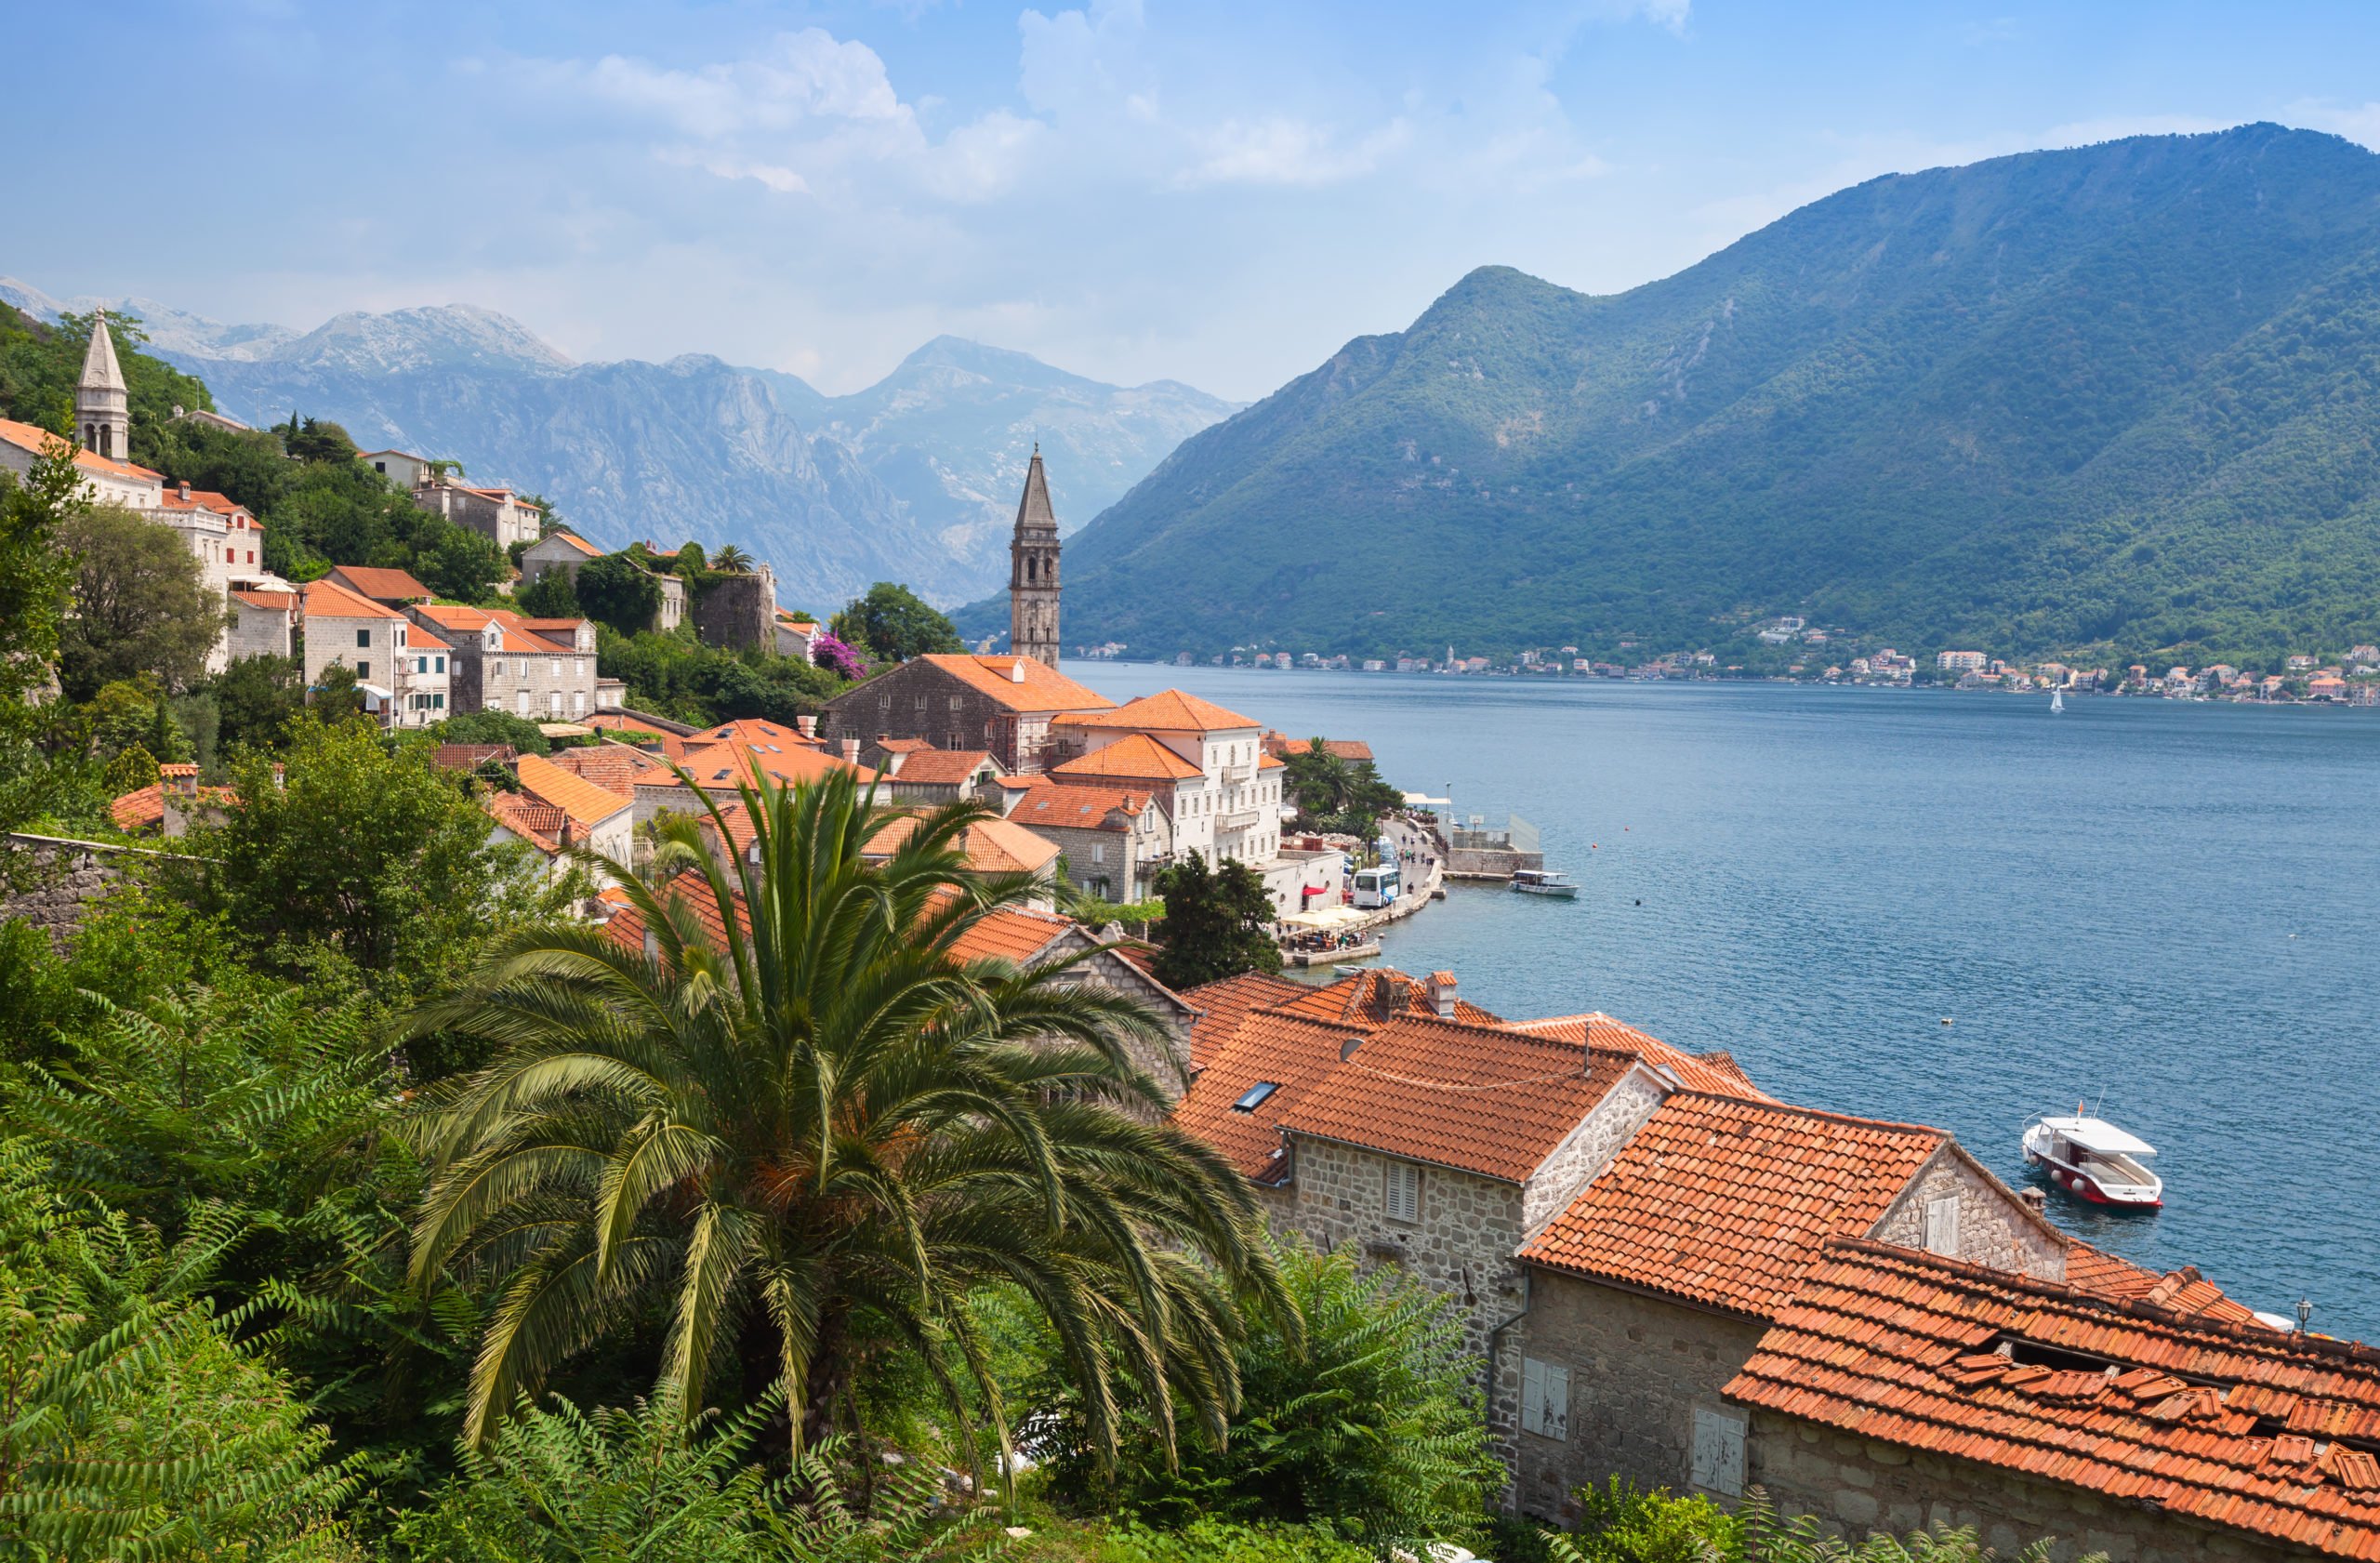 Enjoy The Views Of Kotor Bay On The Montenegro Day Tour From Dubrovnik